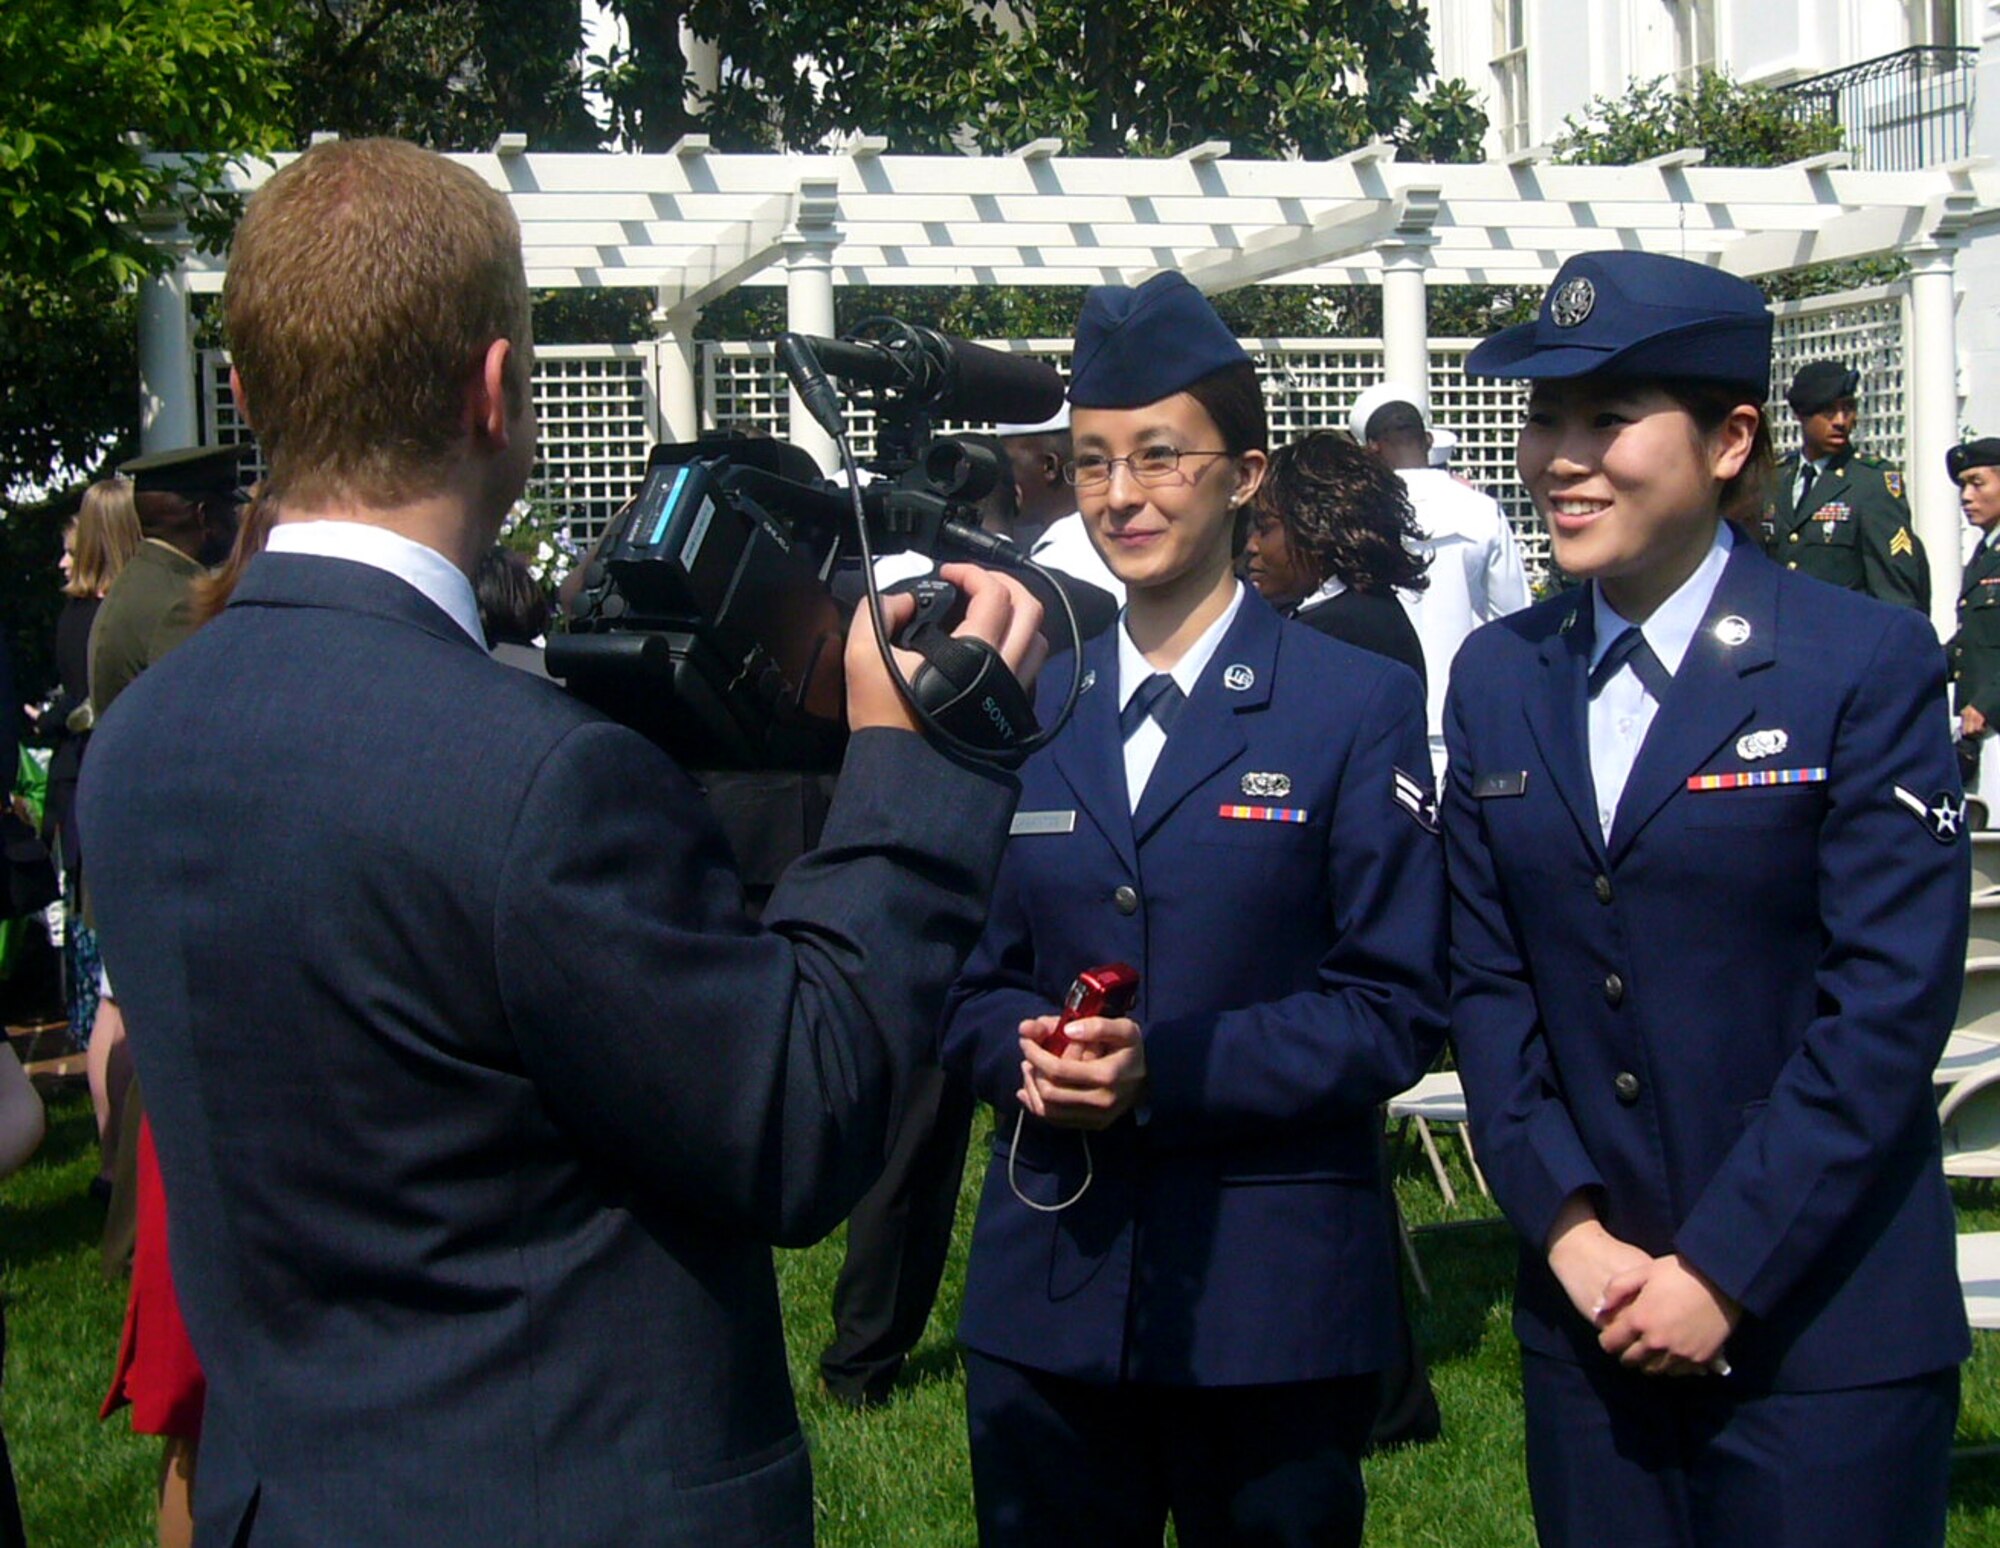 WASHINGTON, D.C. -- Airman 1st Class Ma Antonette Cabantog, 633d Force Support Squadron food services journeyman, and Airman Yu Yuan, 735th Supply Chain Management Group mission capability apprentice, perform an interview at the Oath of Allegiance ceremony at the White House April 23. The Airmen joined 22 other servicemembers in taking the Oath of Allegiance, becoming American citizens. (Courtesy photo)